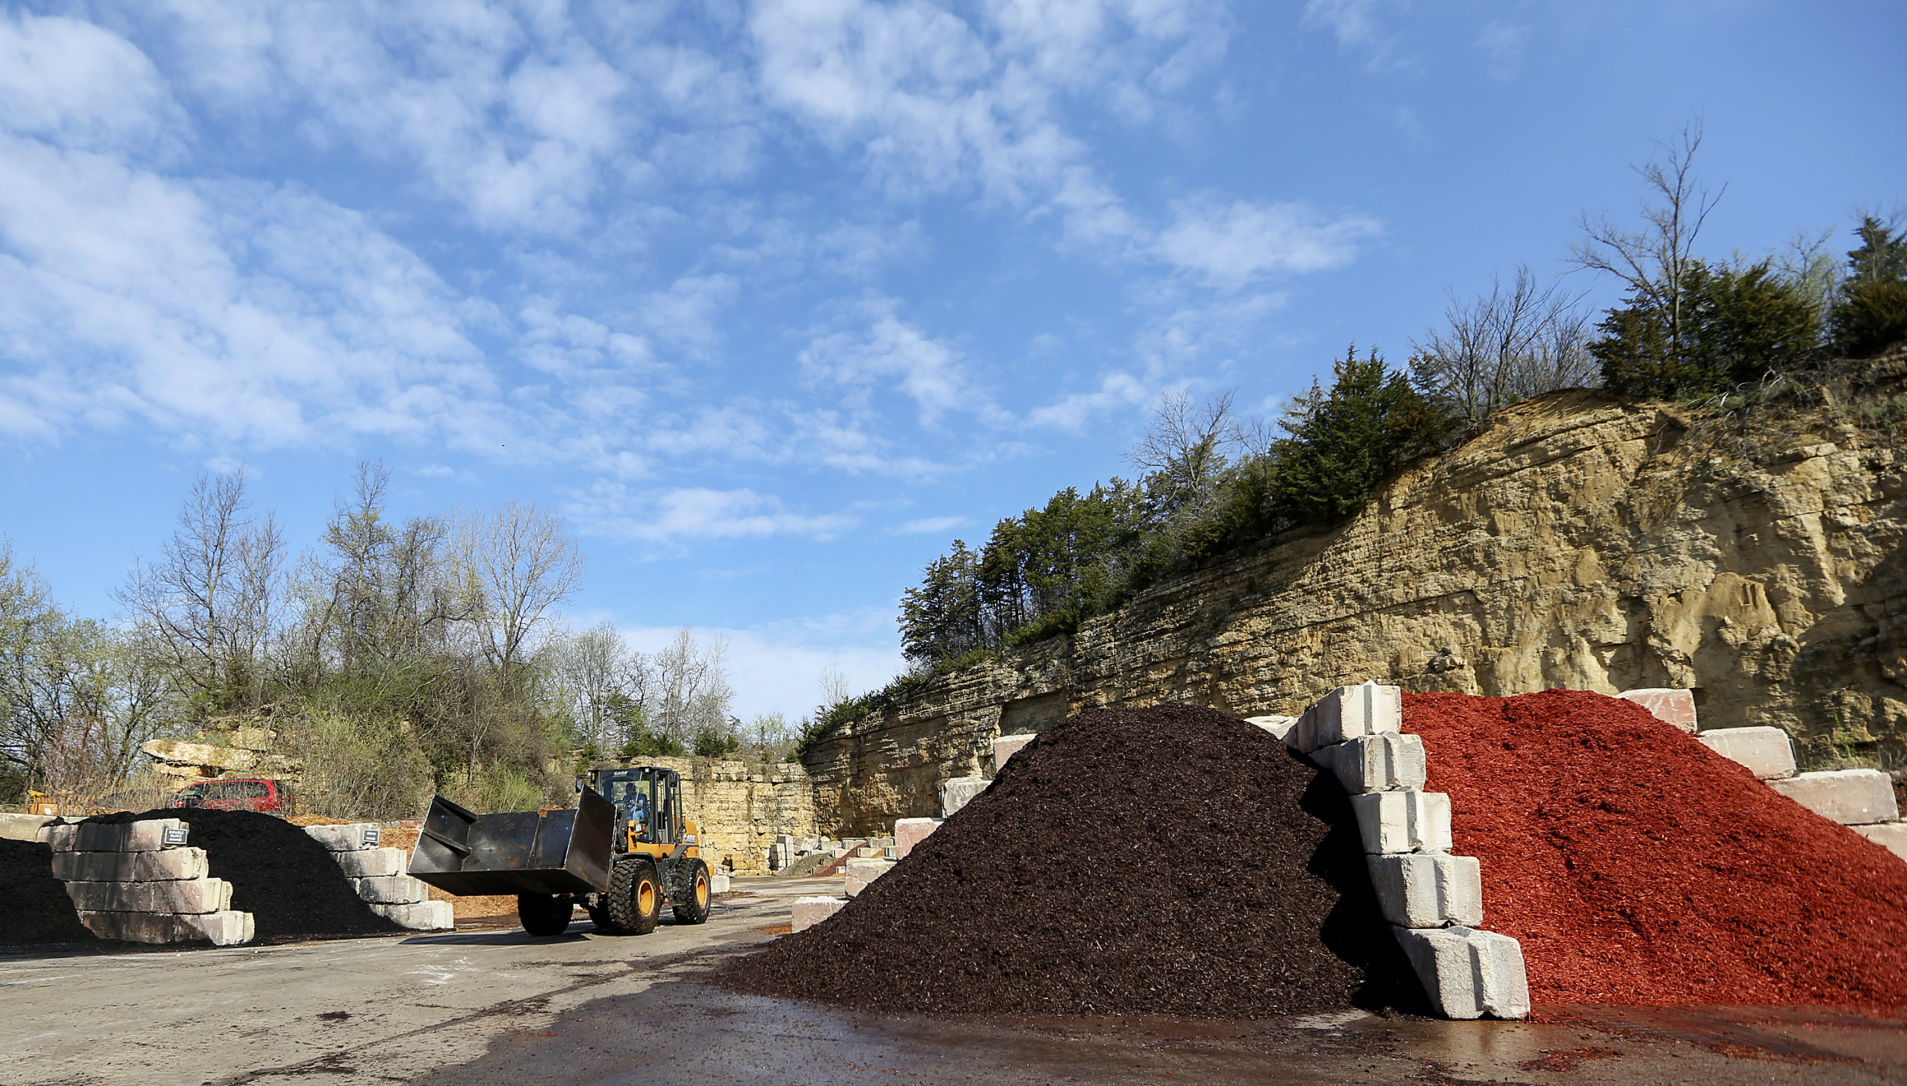 A variety of mulch piles at Dubuque Mulch Company in Dubuque on Friday, May 4, 2018.    PHOTO CREDIT: NICKI KOHL